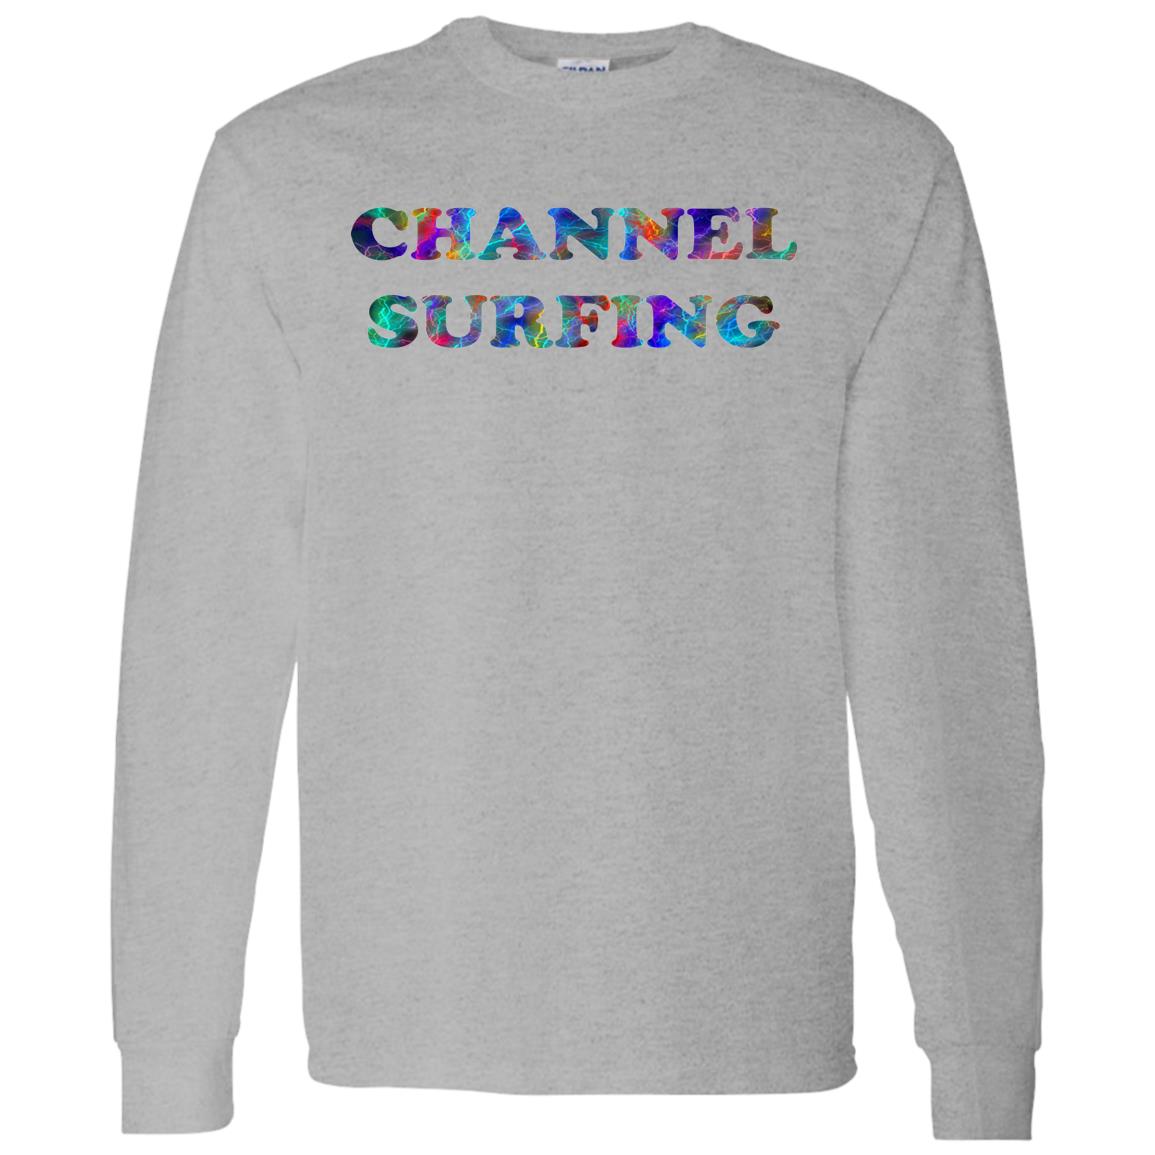 Channel Surfing Long Sleeve T-Shirt